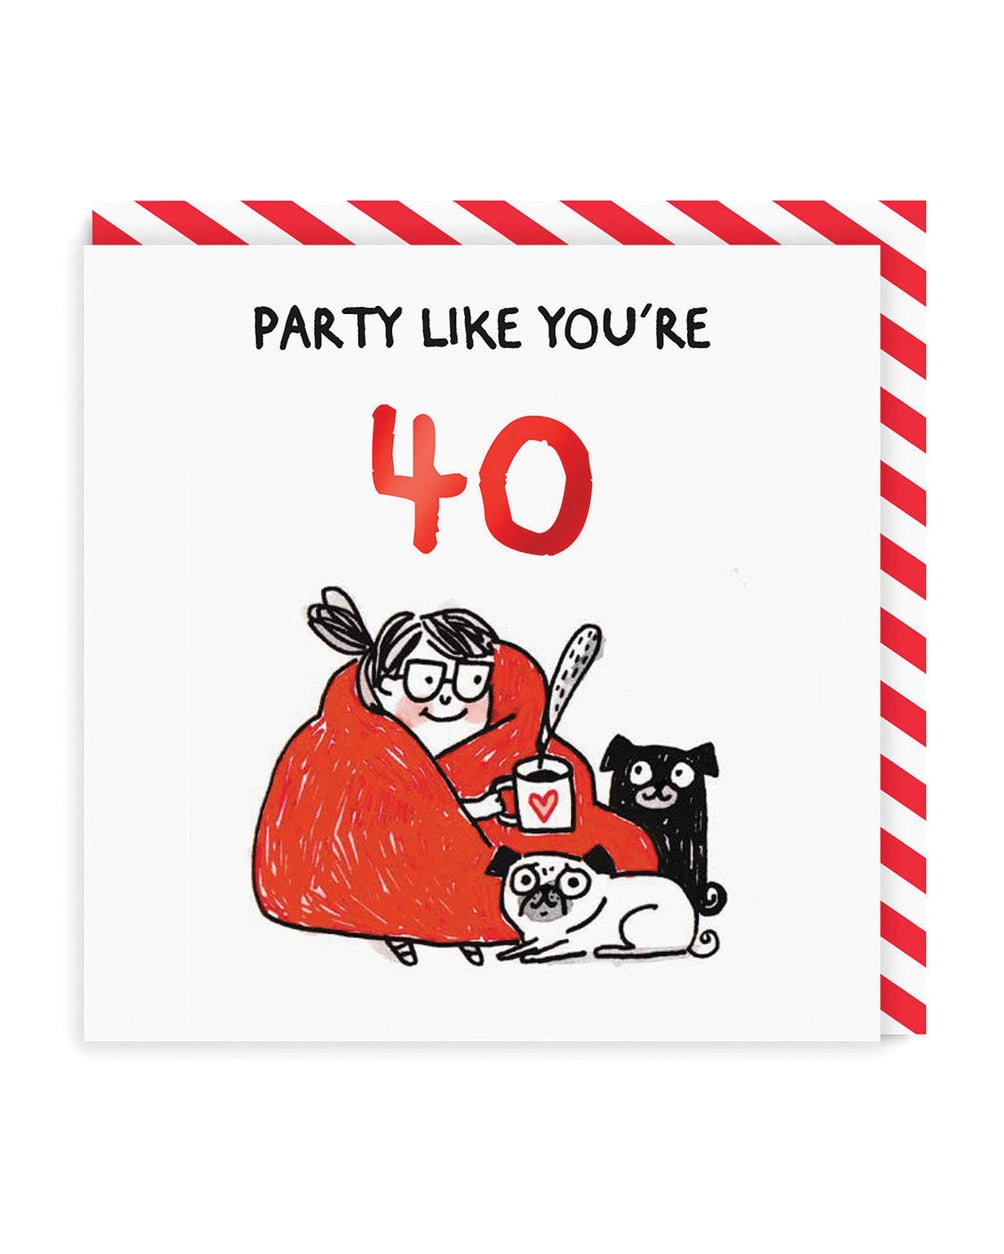 Greeting card "Party Like You're 40"